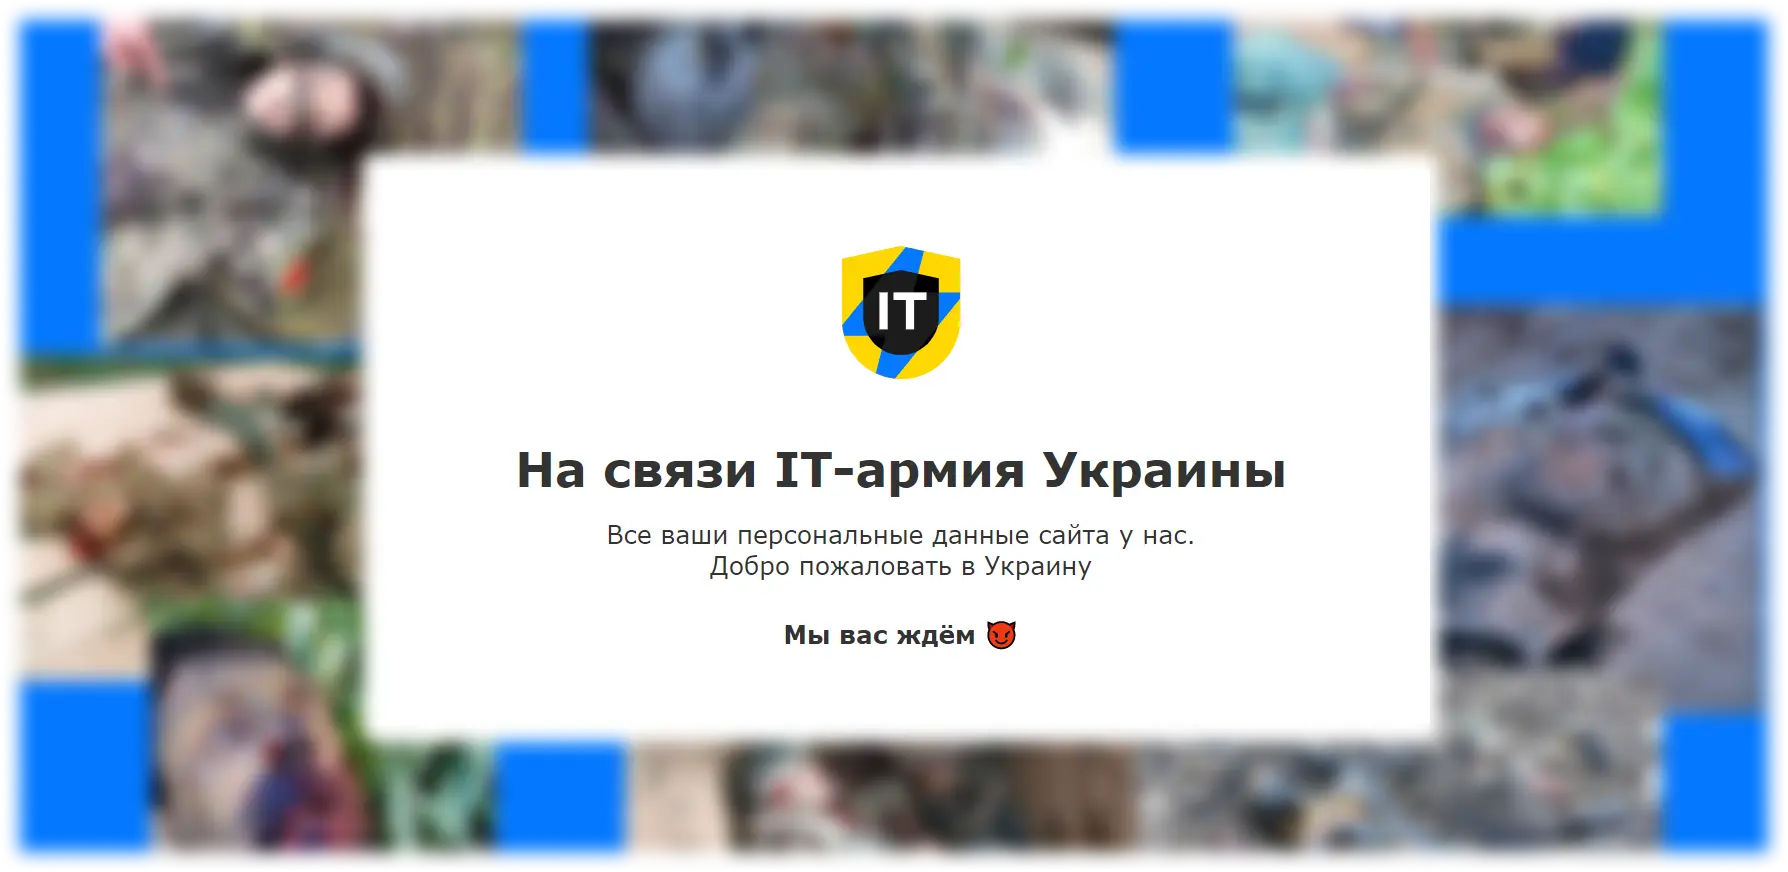 the most famous cyberattacks on Russia - the IT army of Ukraine hacked the site of Wagner PVK